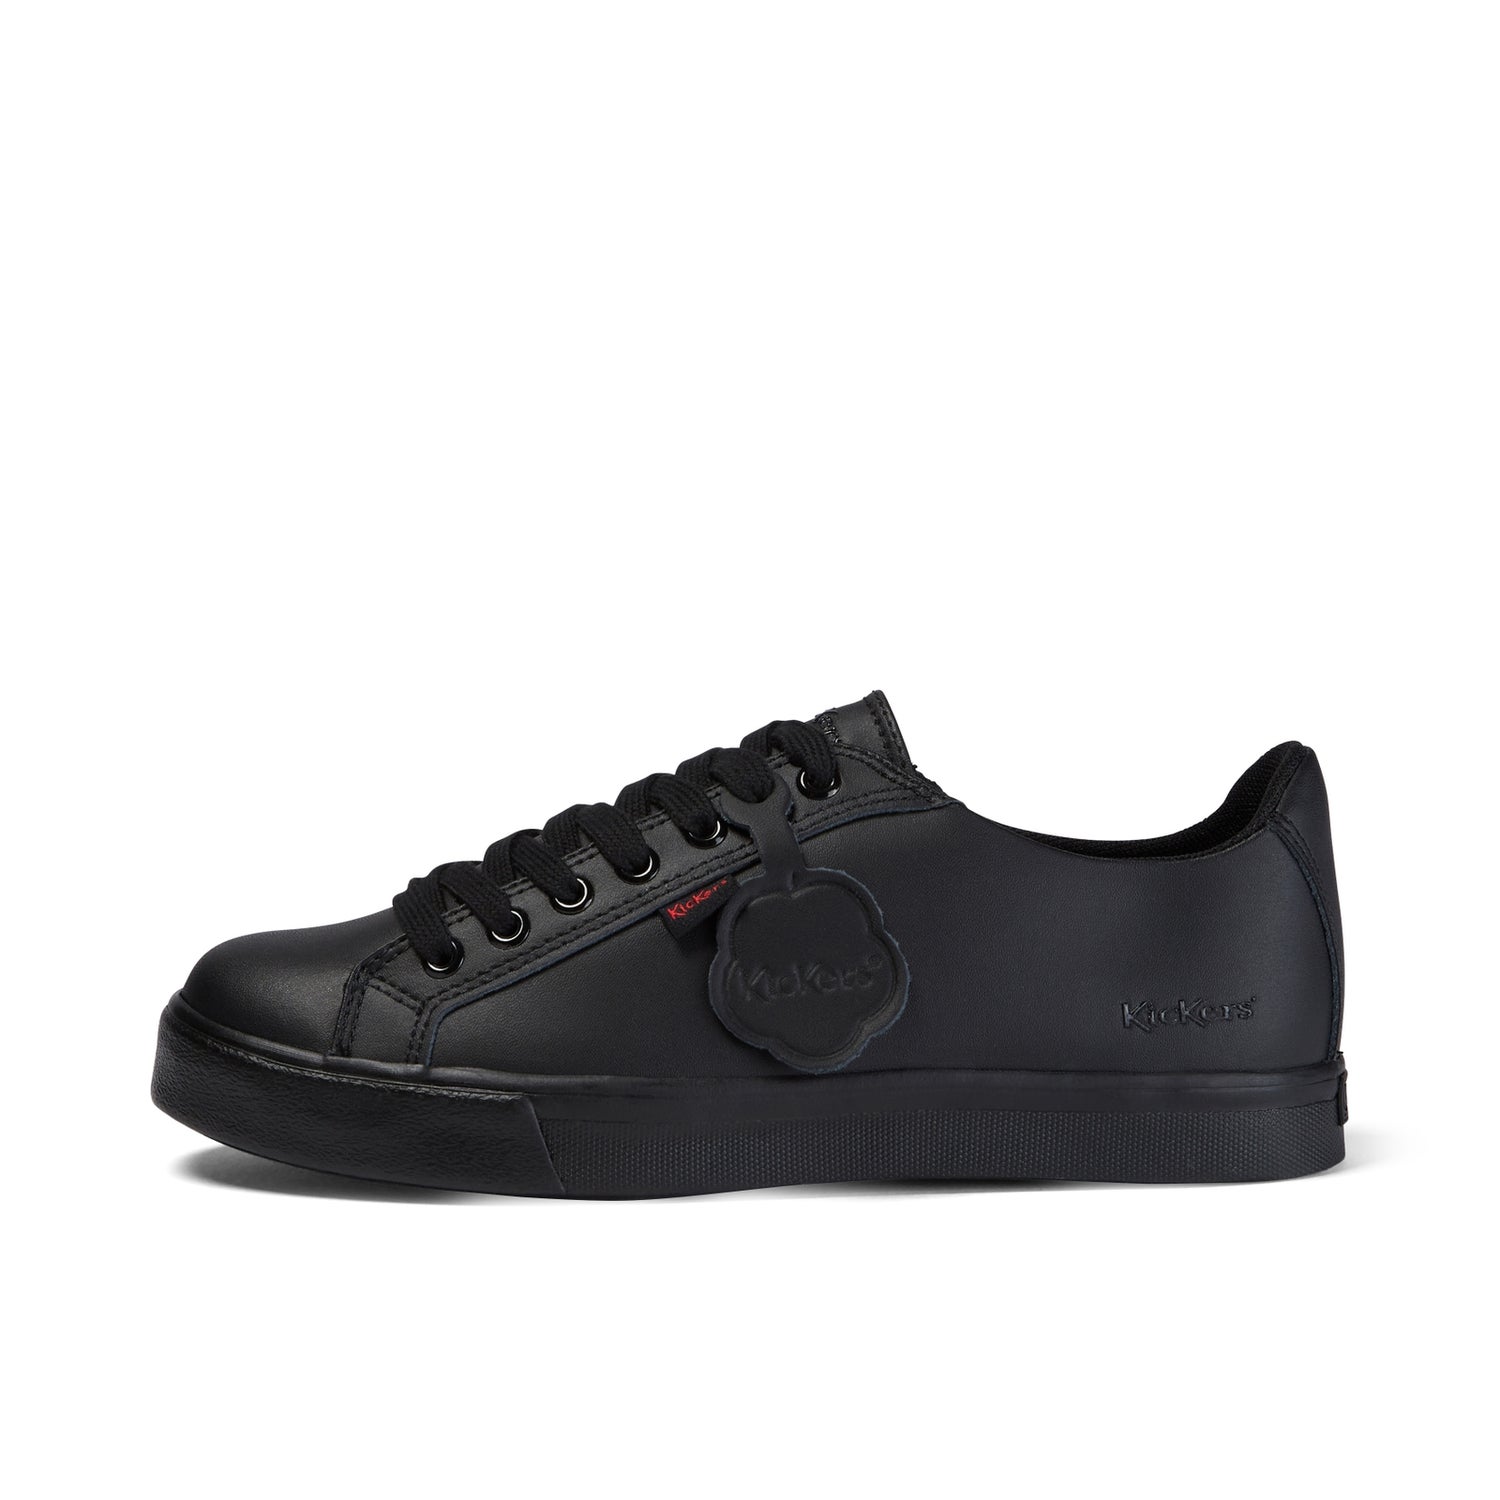 Kickers Youth Tovni Lacer Leather Shoes - Black - 5